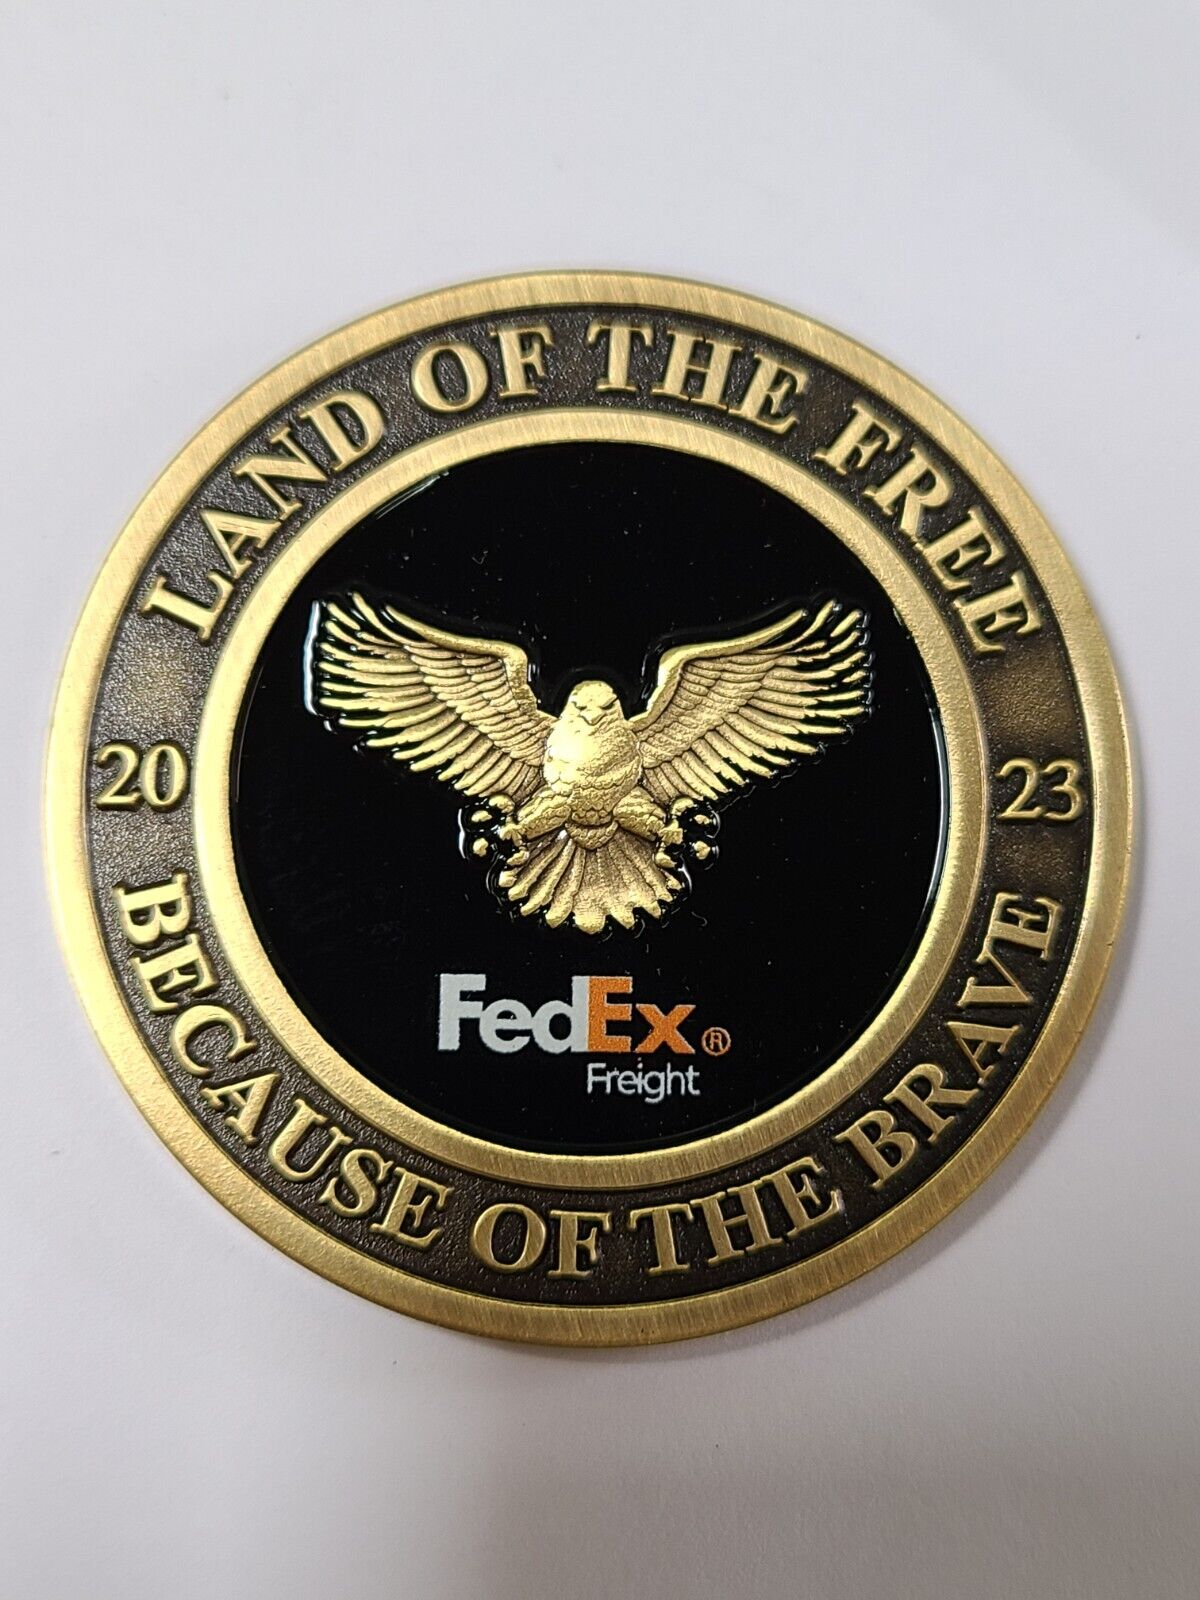 FedEx Land Of The Free Because Of The Brave  Challenge Coin